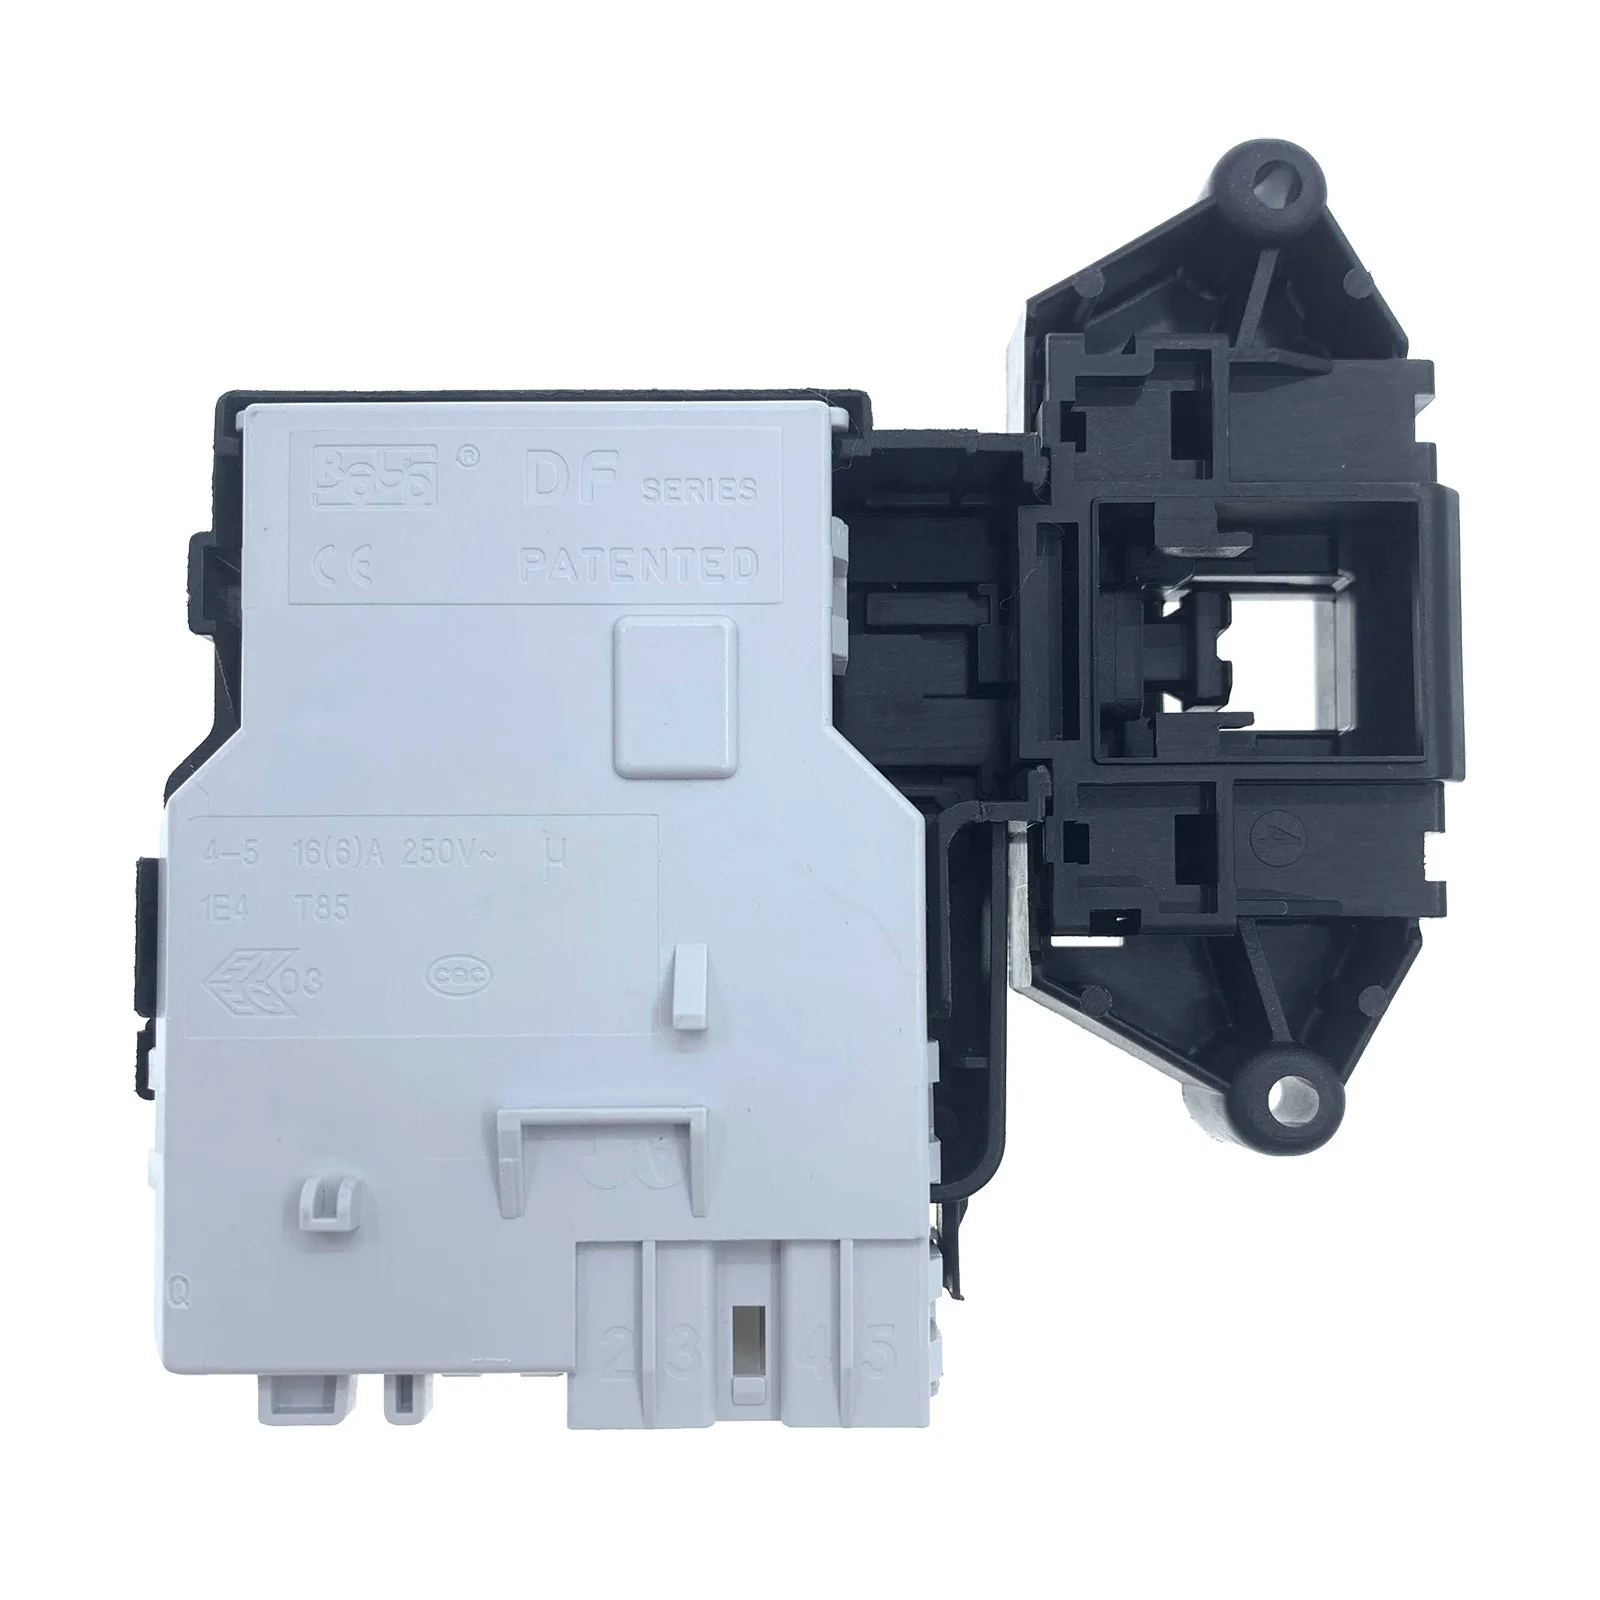 EBF49827801 LG Washing Machine Replacement Parts Electronic Delay Door Lock Interlock Switch Assembly